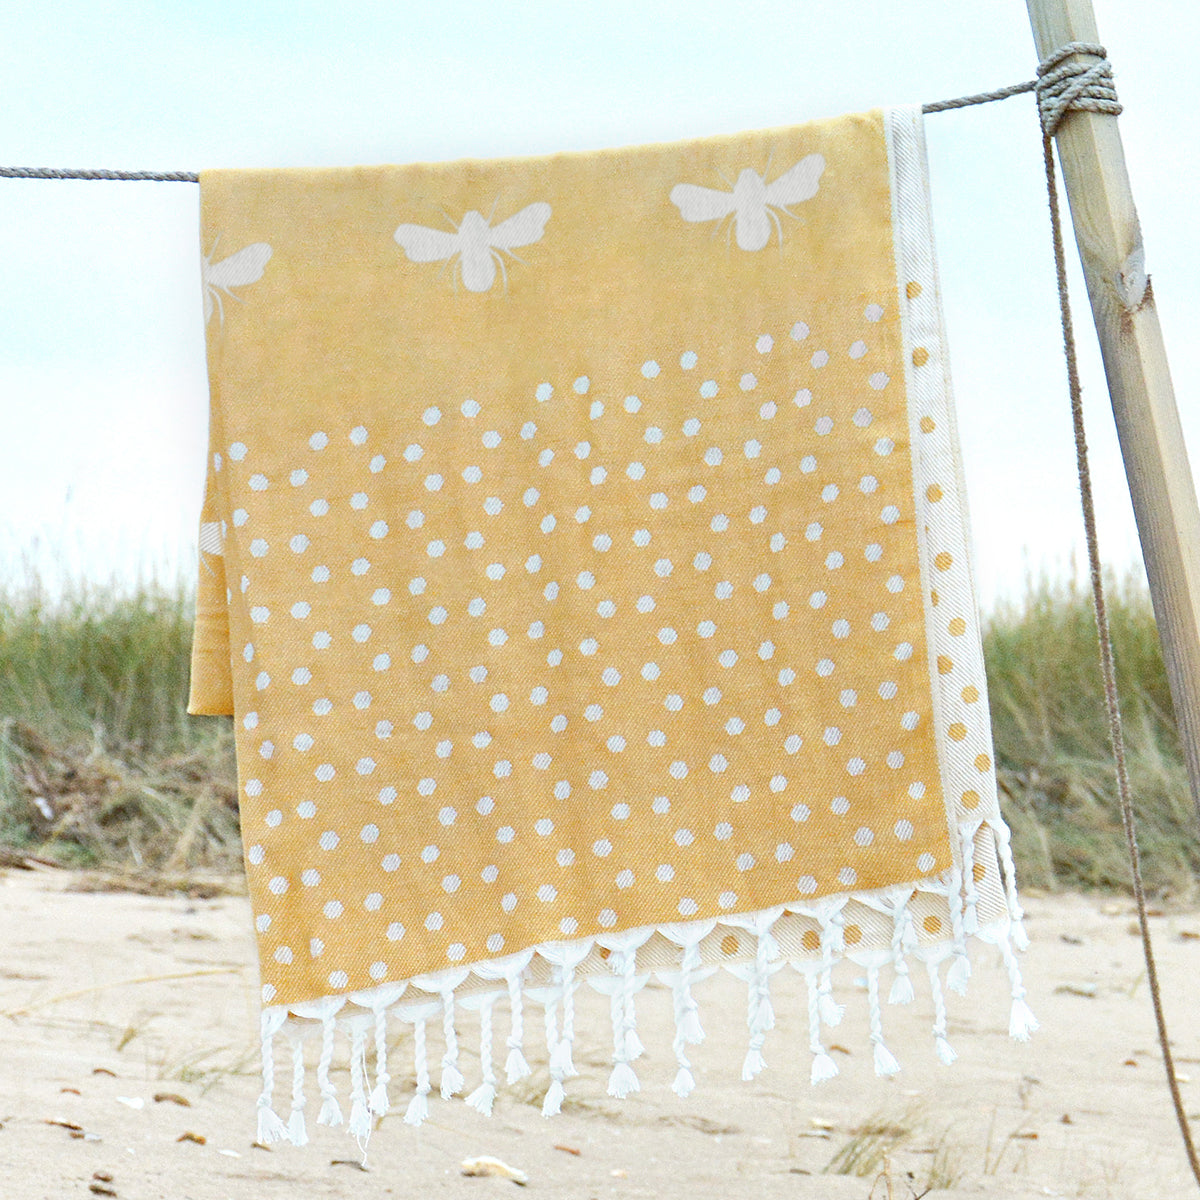 Sophie Allport's yellow hammam towel covered white bees, perfect for the park or beach.